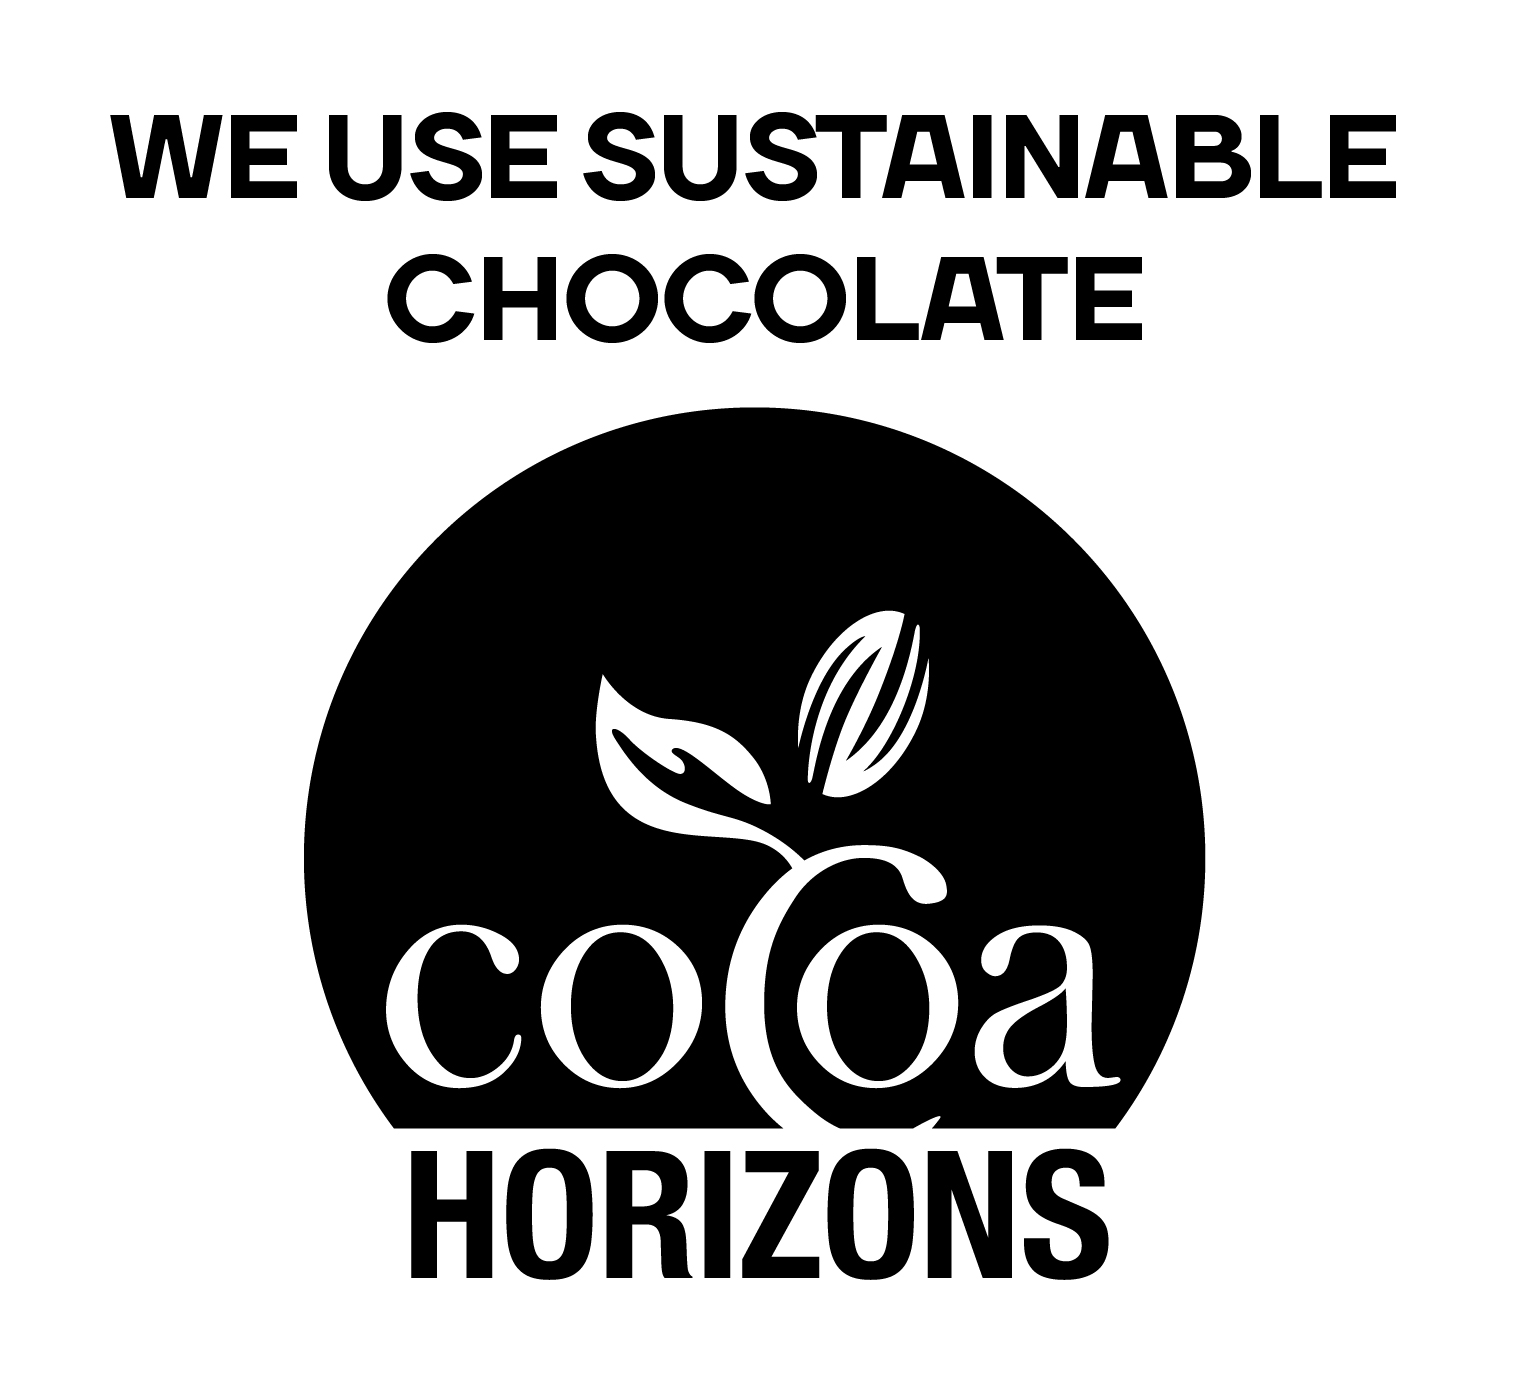 Learn More about Our Chocolates here